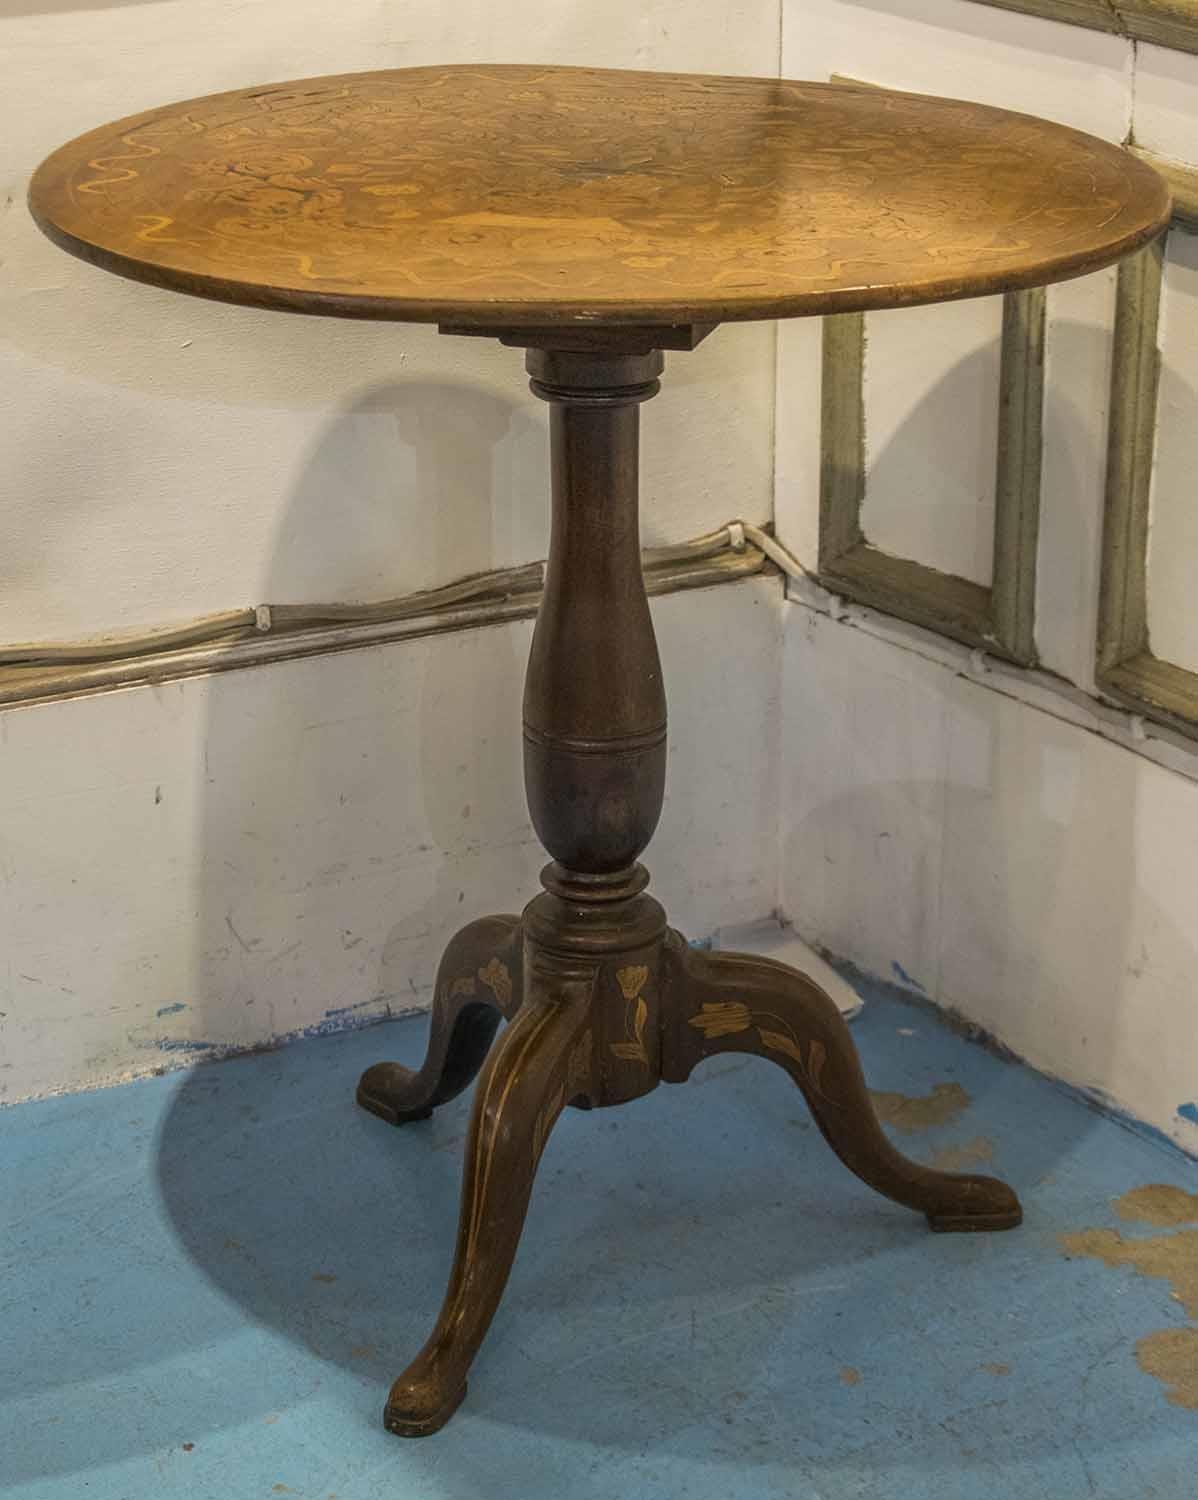 TRIPOD TABLE, 18th century Dutch mahogany and floral marquetry with circular tilt top, 74cm H x 72cm - Image 3 of 3